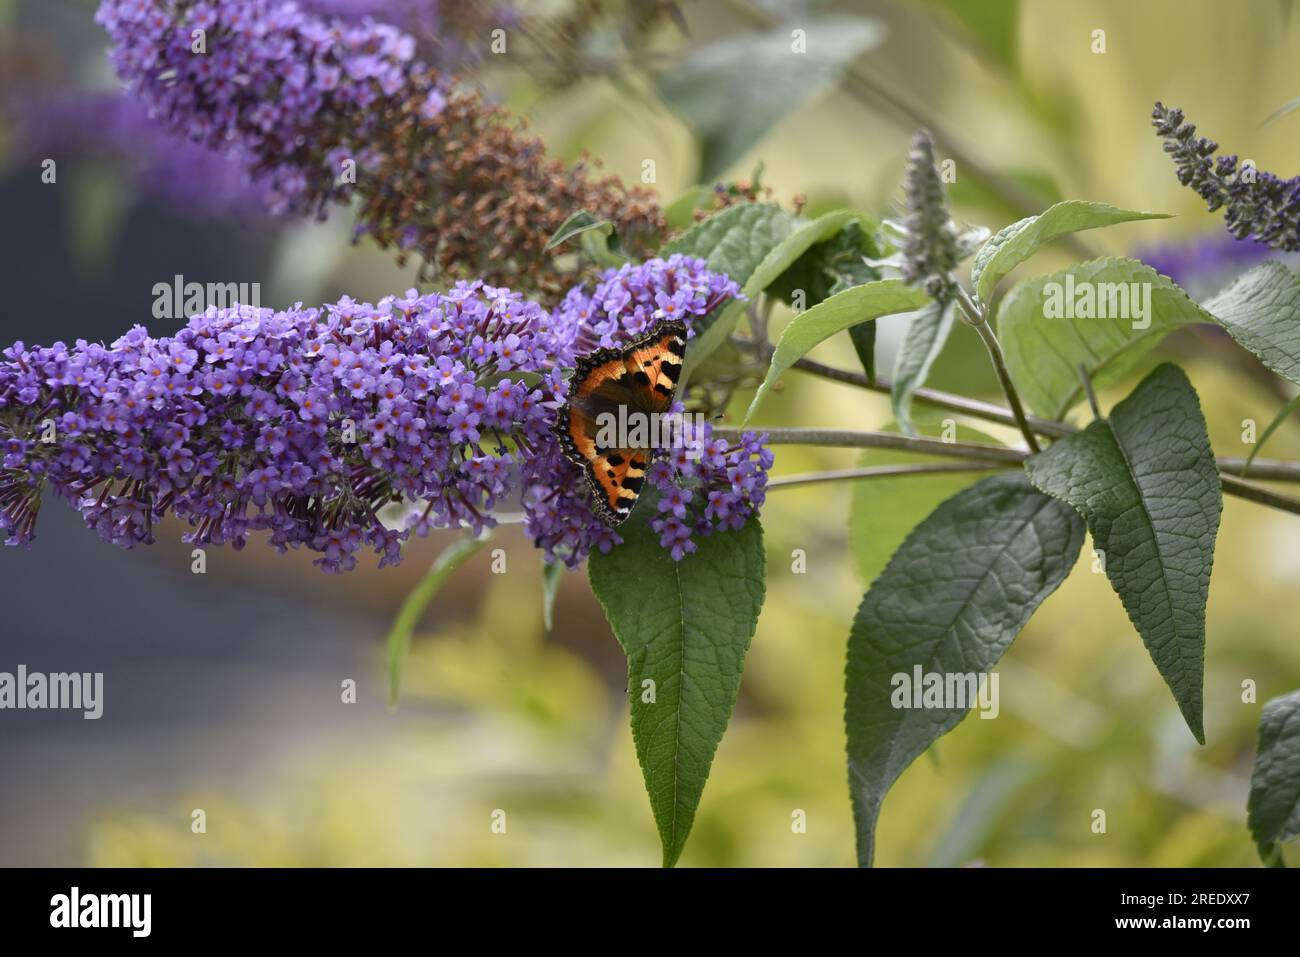 View from Above of a Small Tortoiseshell Butterfly (Aglais urticae) on a Purple Buddleia Flower, Wings Open, Head Facing Right of Image, taken in UK Stock Photo